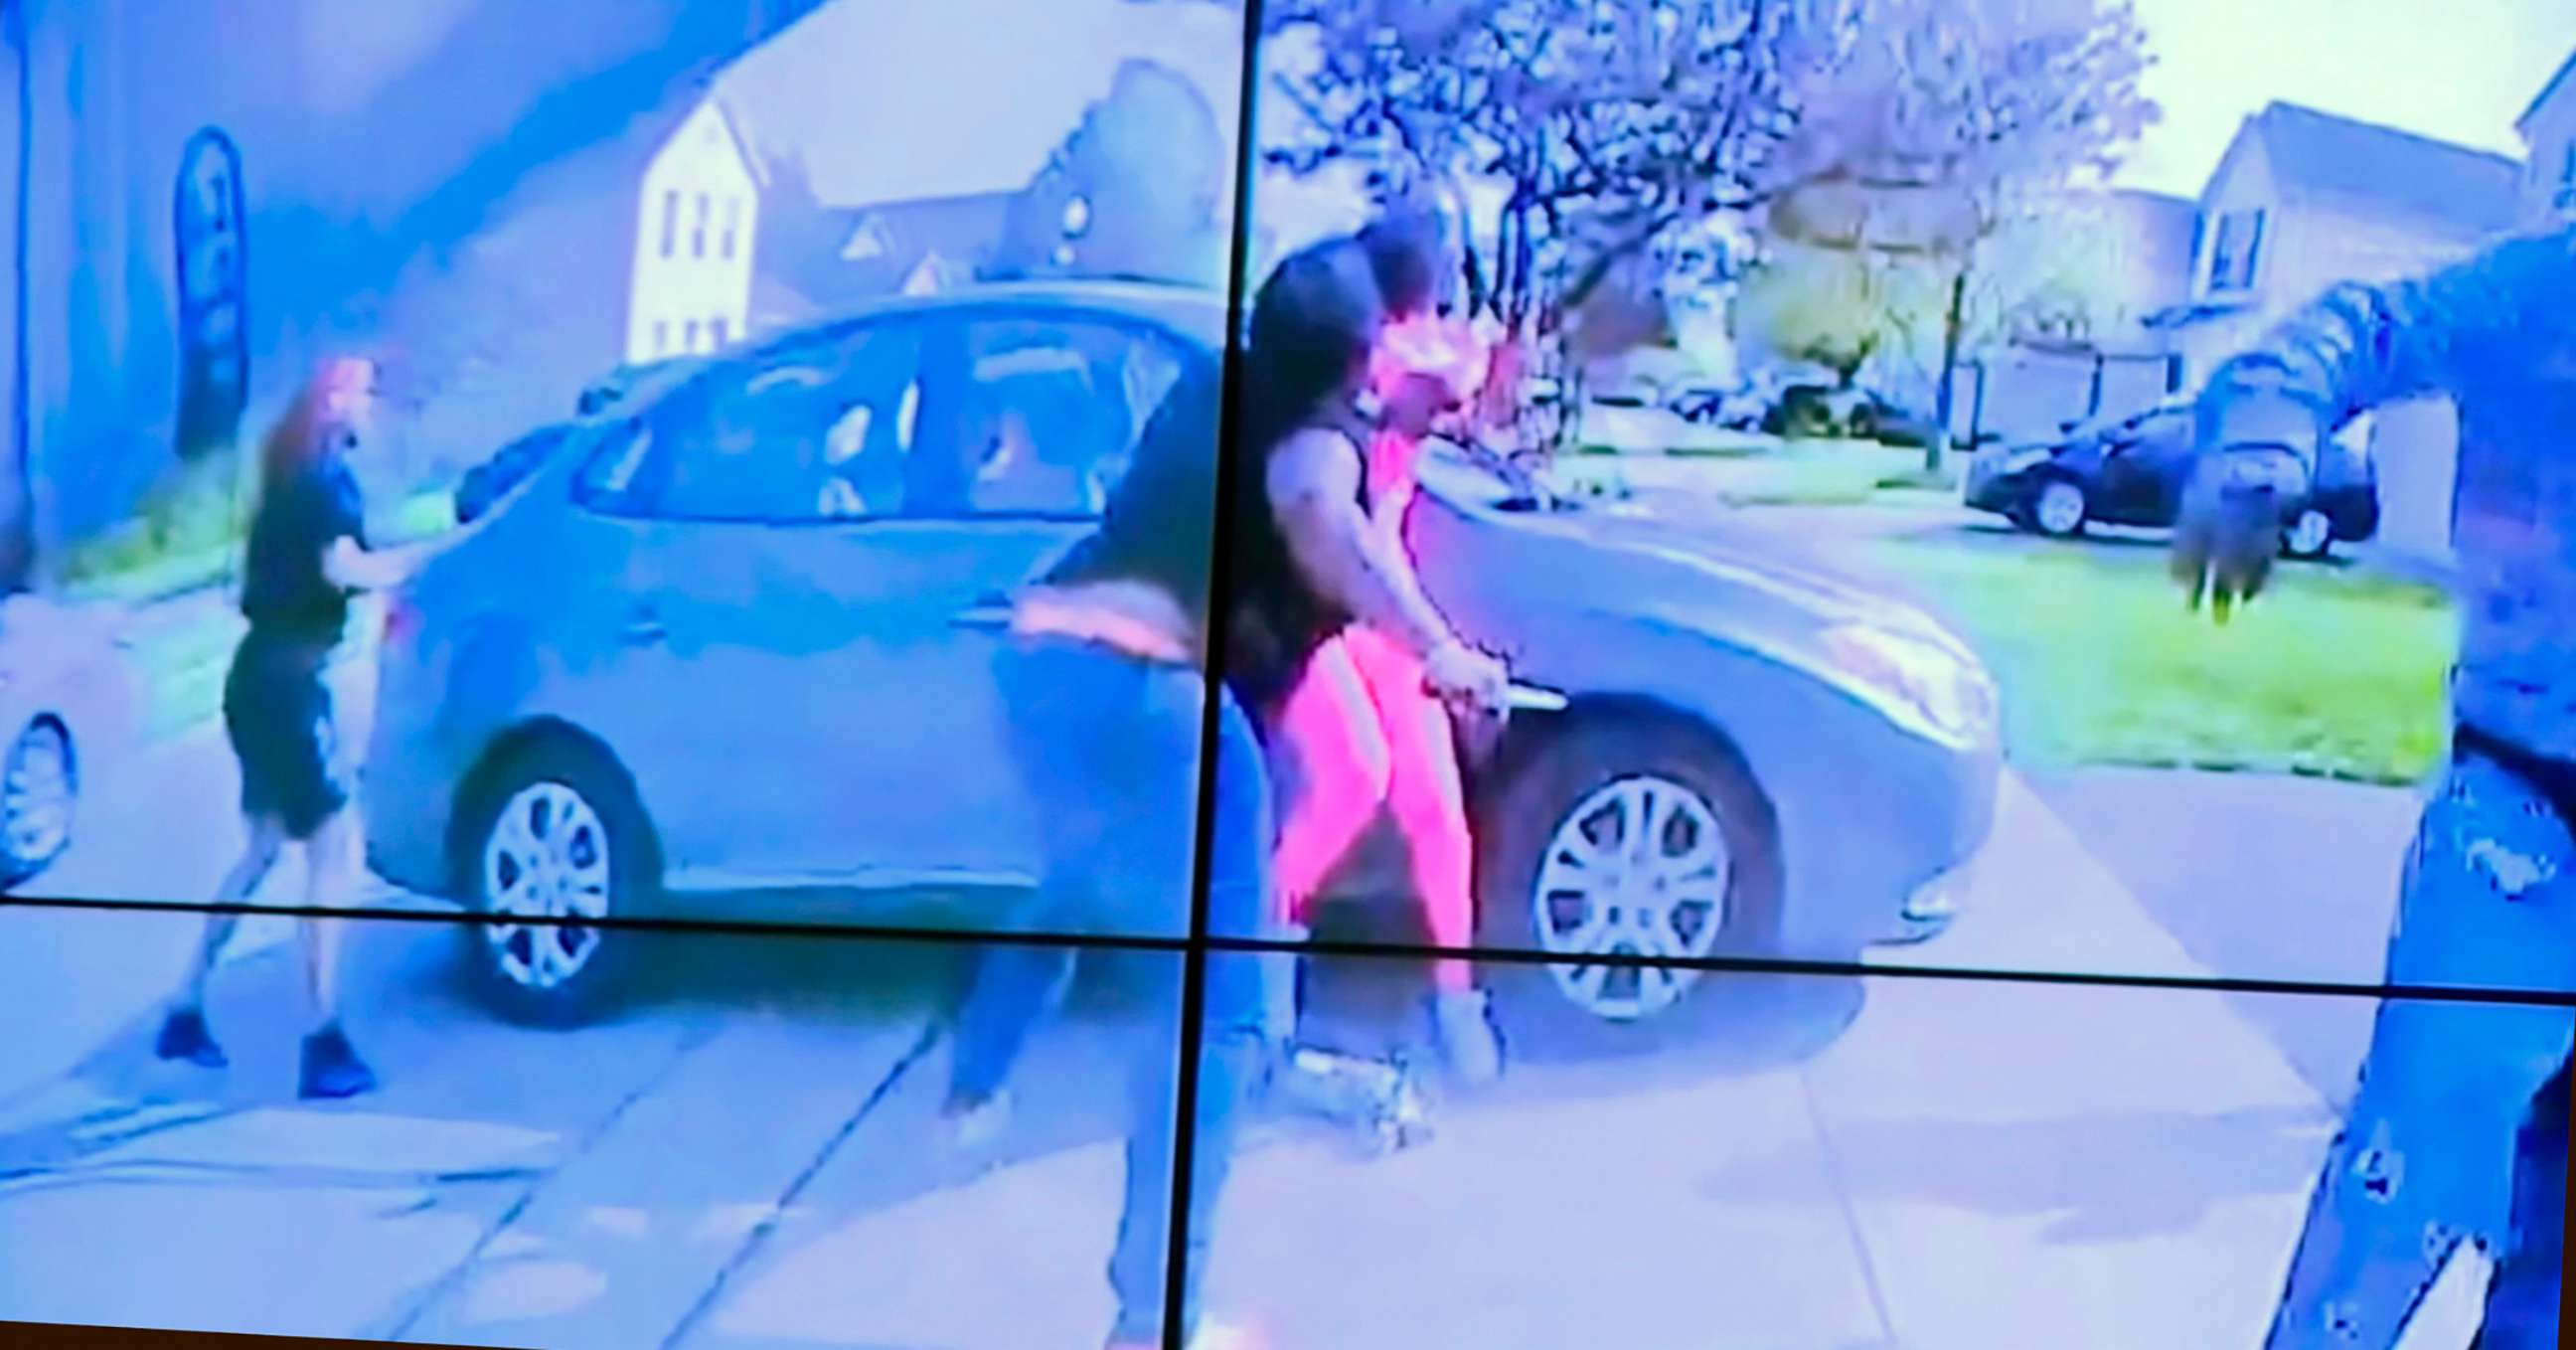 PHOTO: A still image from police body cam appears to show what police describe as the girl swinging a knife toward another female, before police fired, April 20 2021, in Columbus, Ohio, later identified as Ma'khia Bryant.